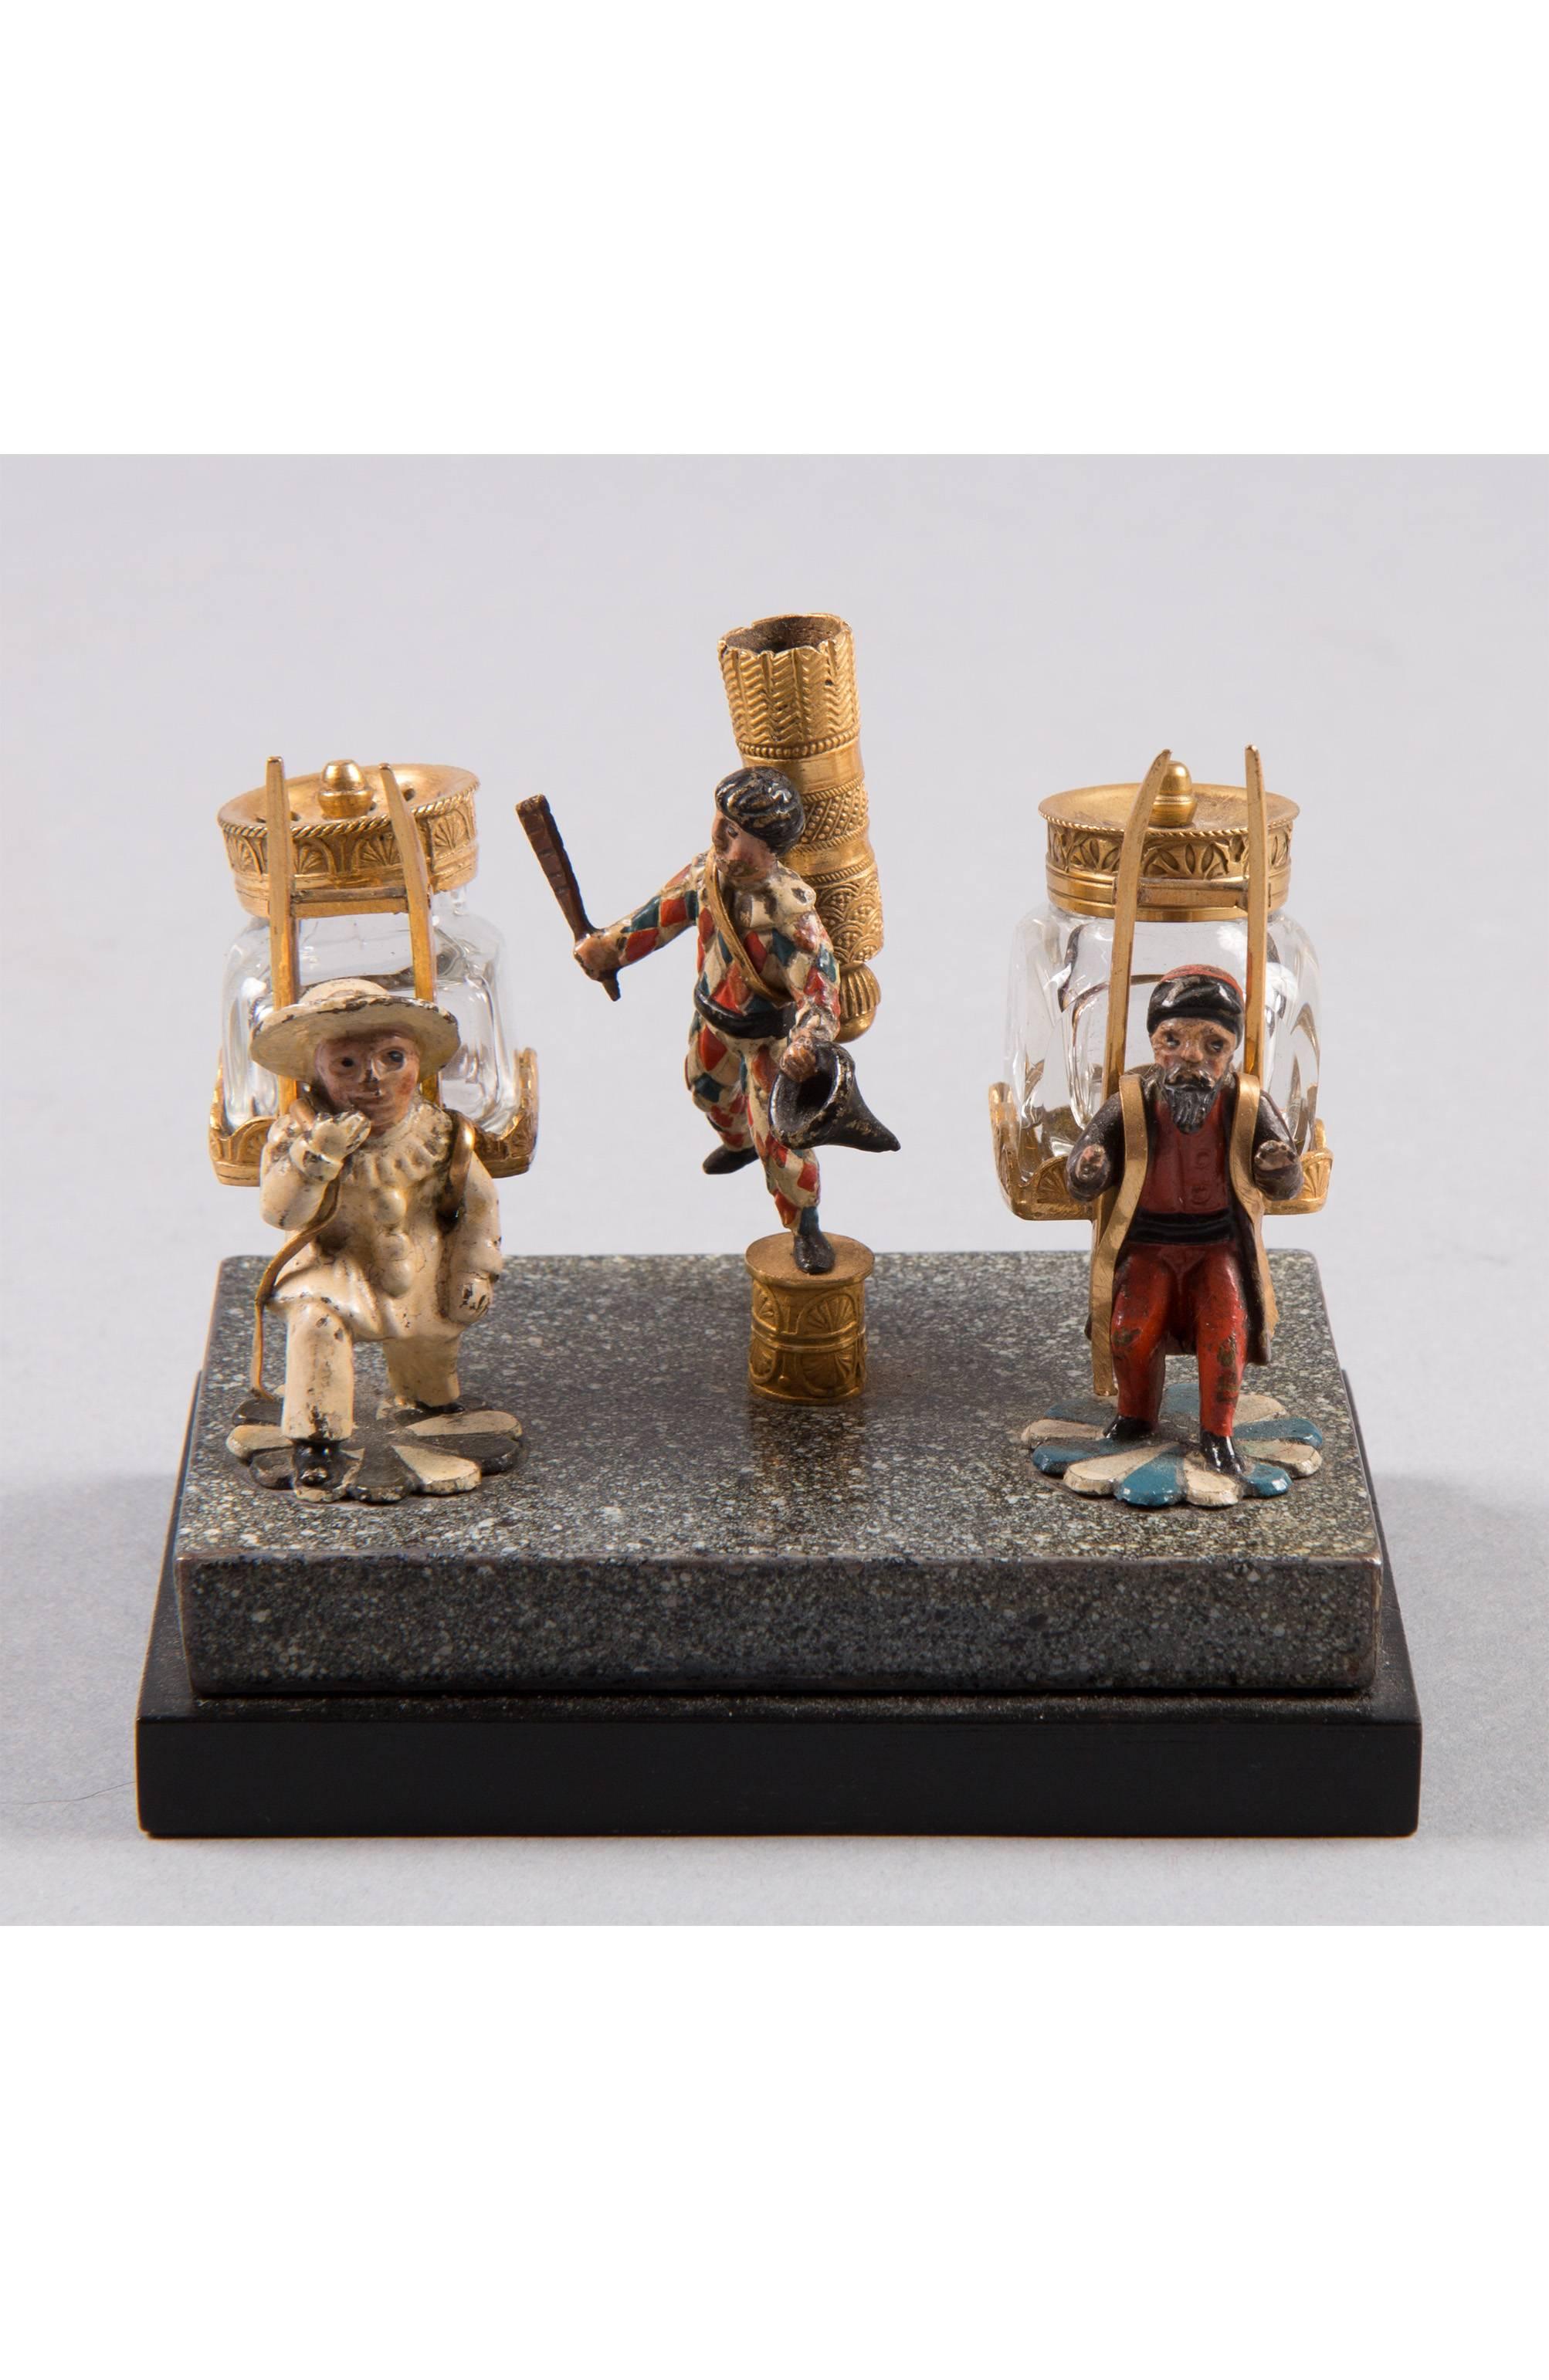 Two small ormolu and cold painted bottle inkstand
Vienna, circa 1810
With three figures on a marble and wooden base
Measure: 3.5 inch wide.